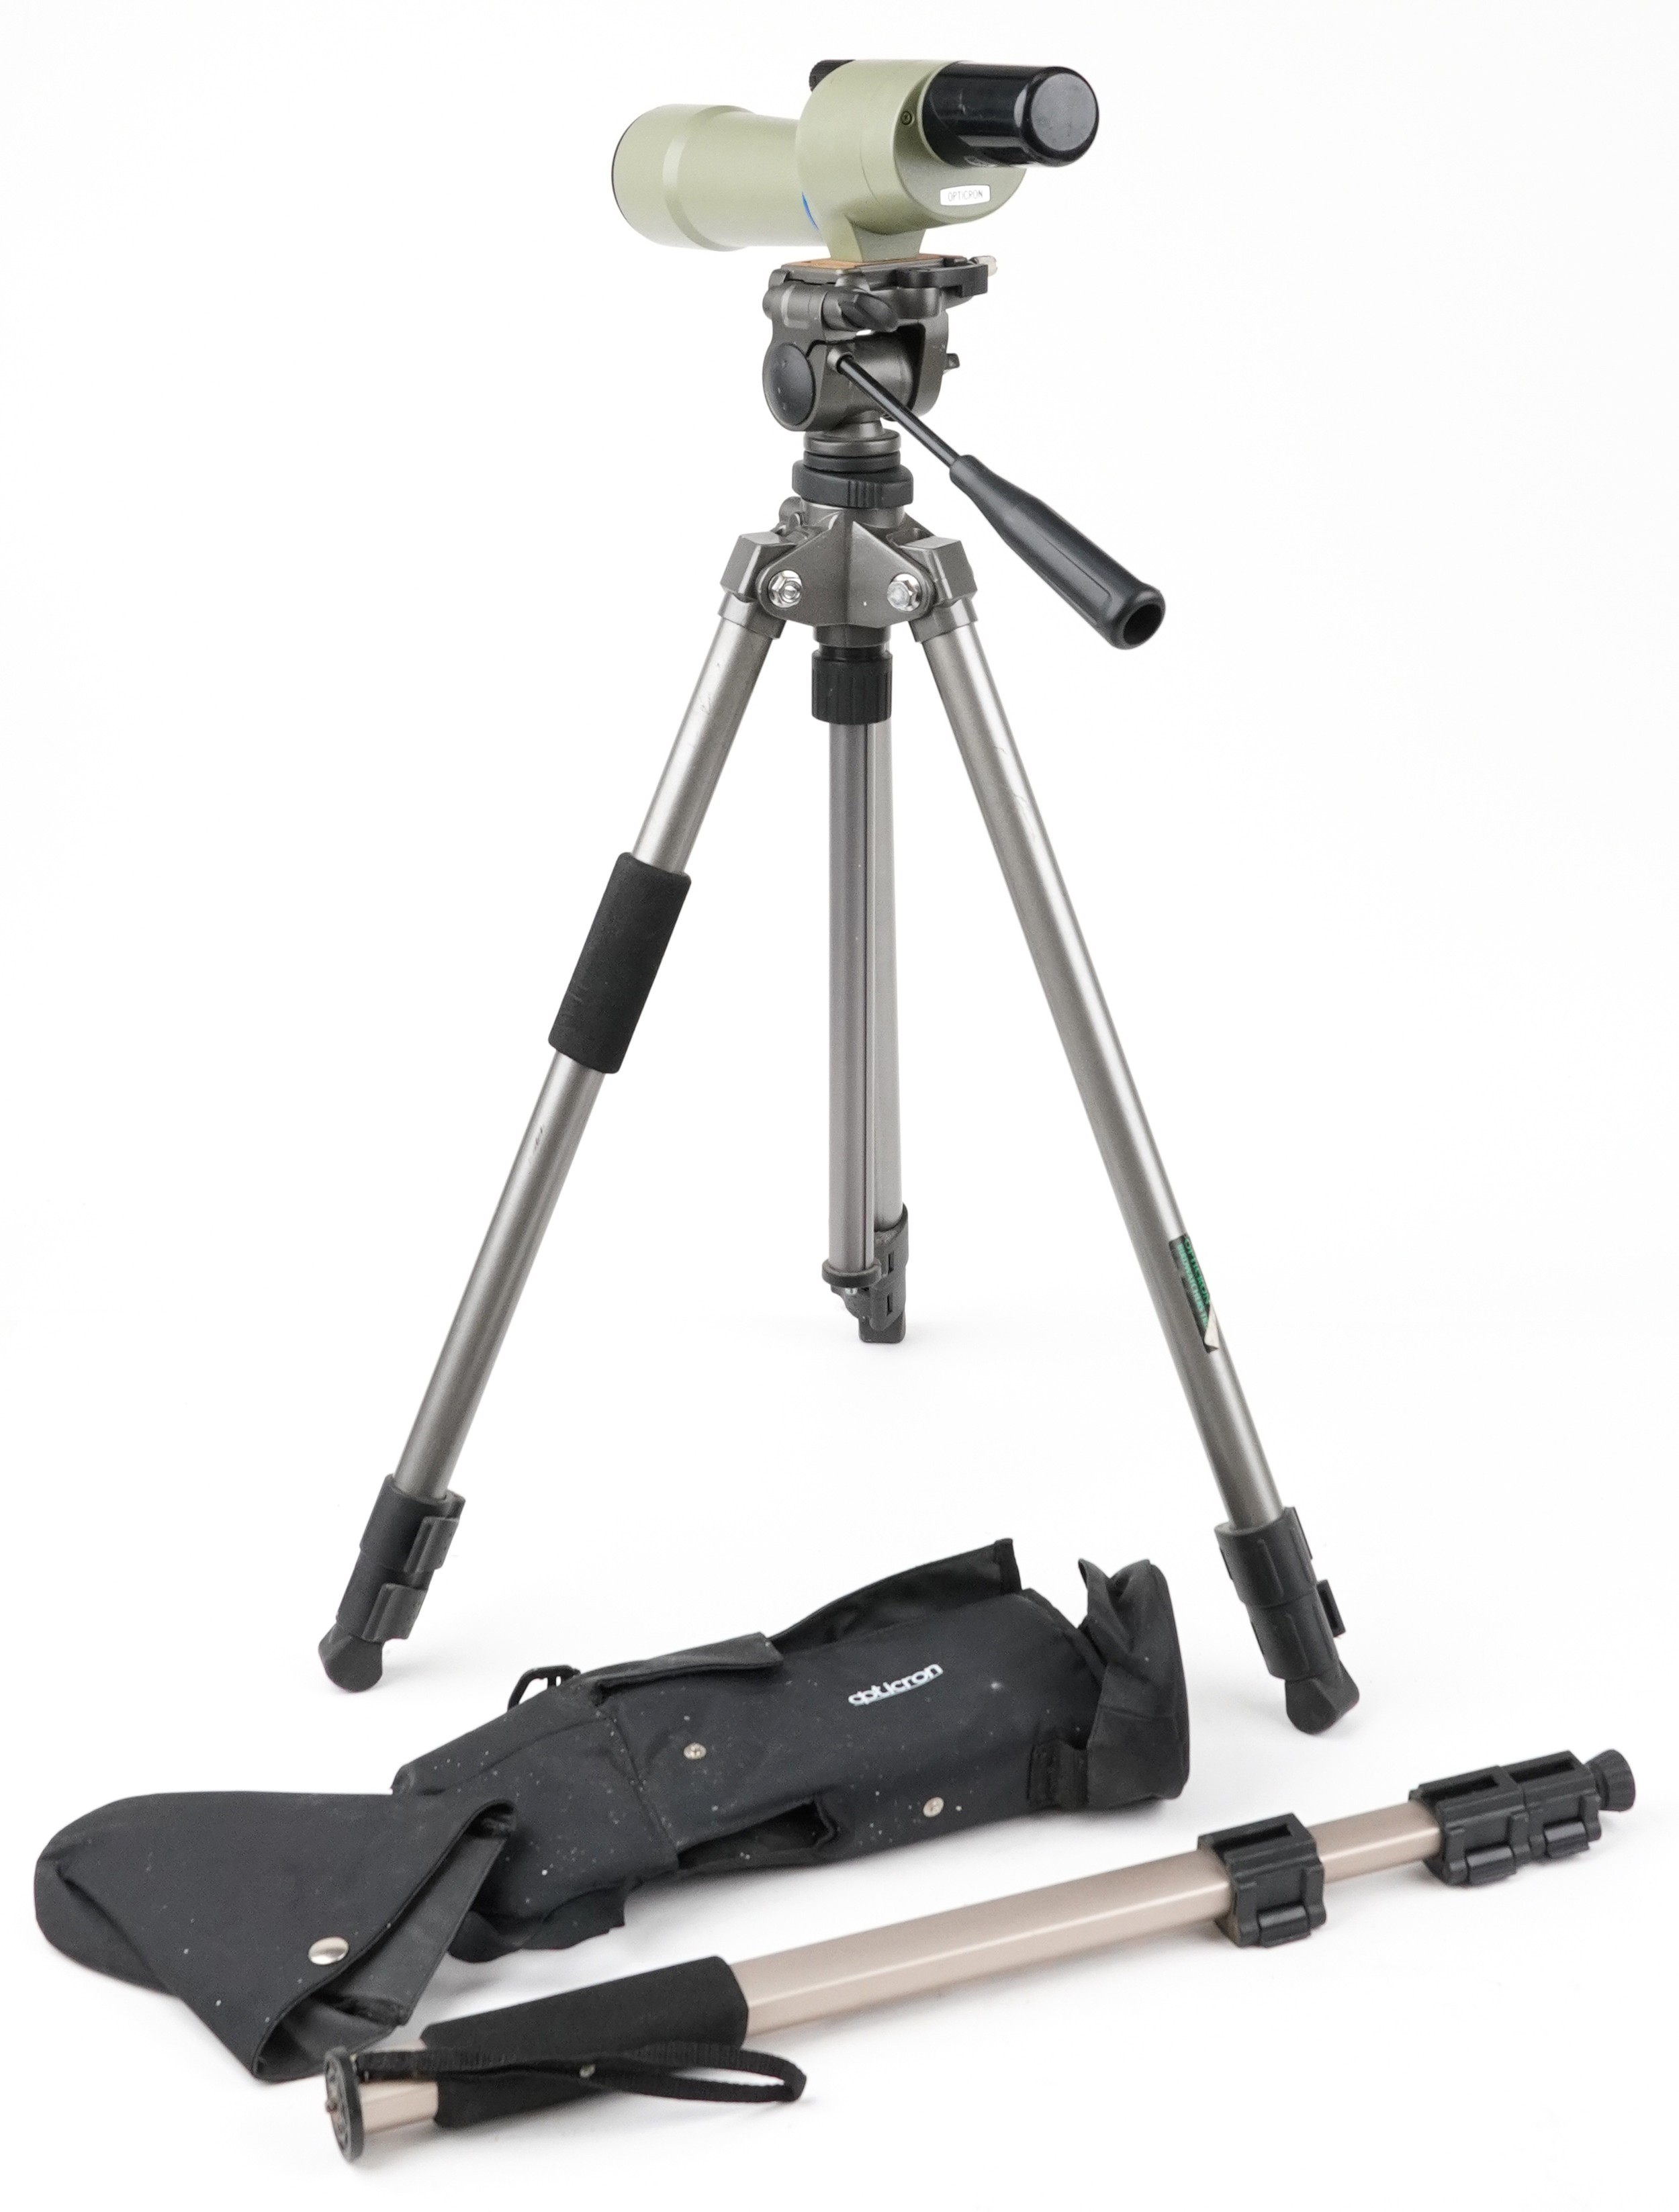 Opticron spotting scope with protective case, tripod stand and Velbon UP-4000 tripod - Image 2 of 2